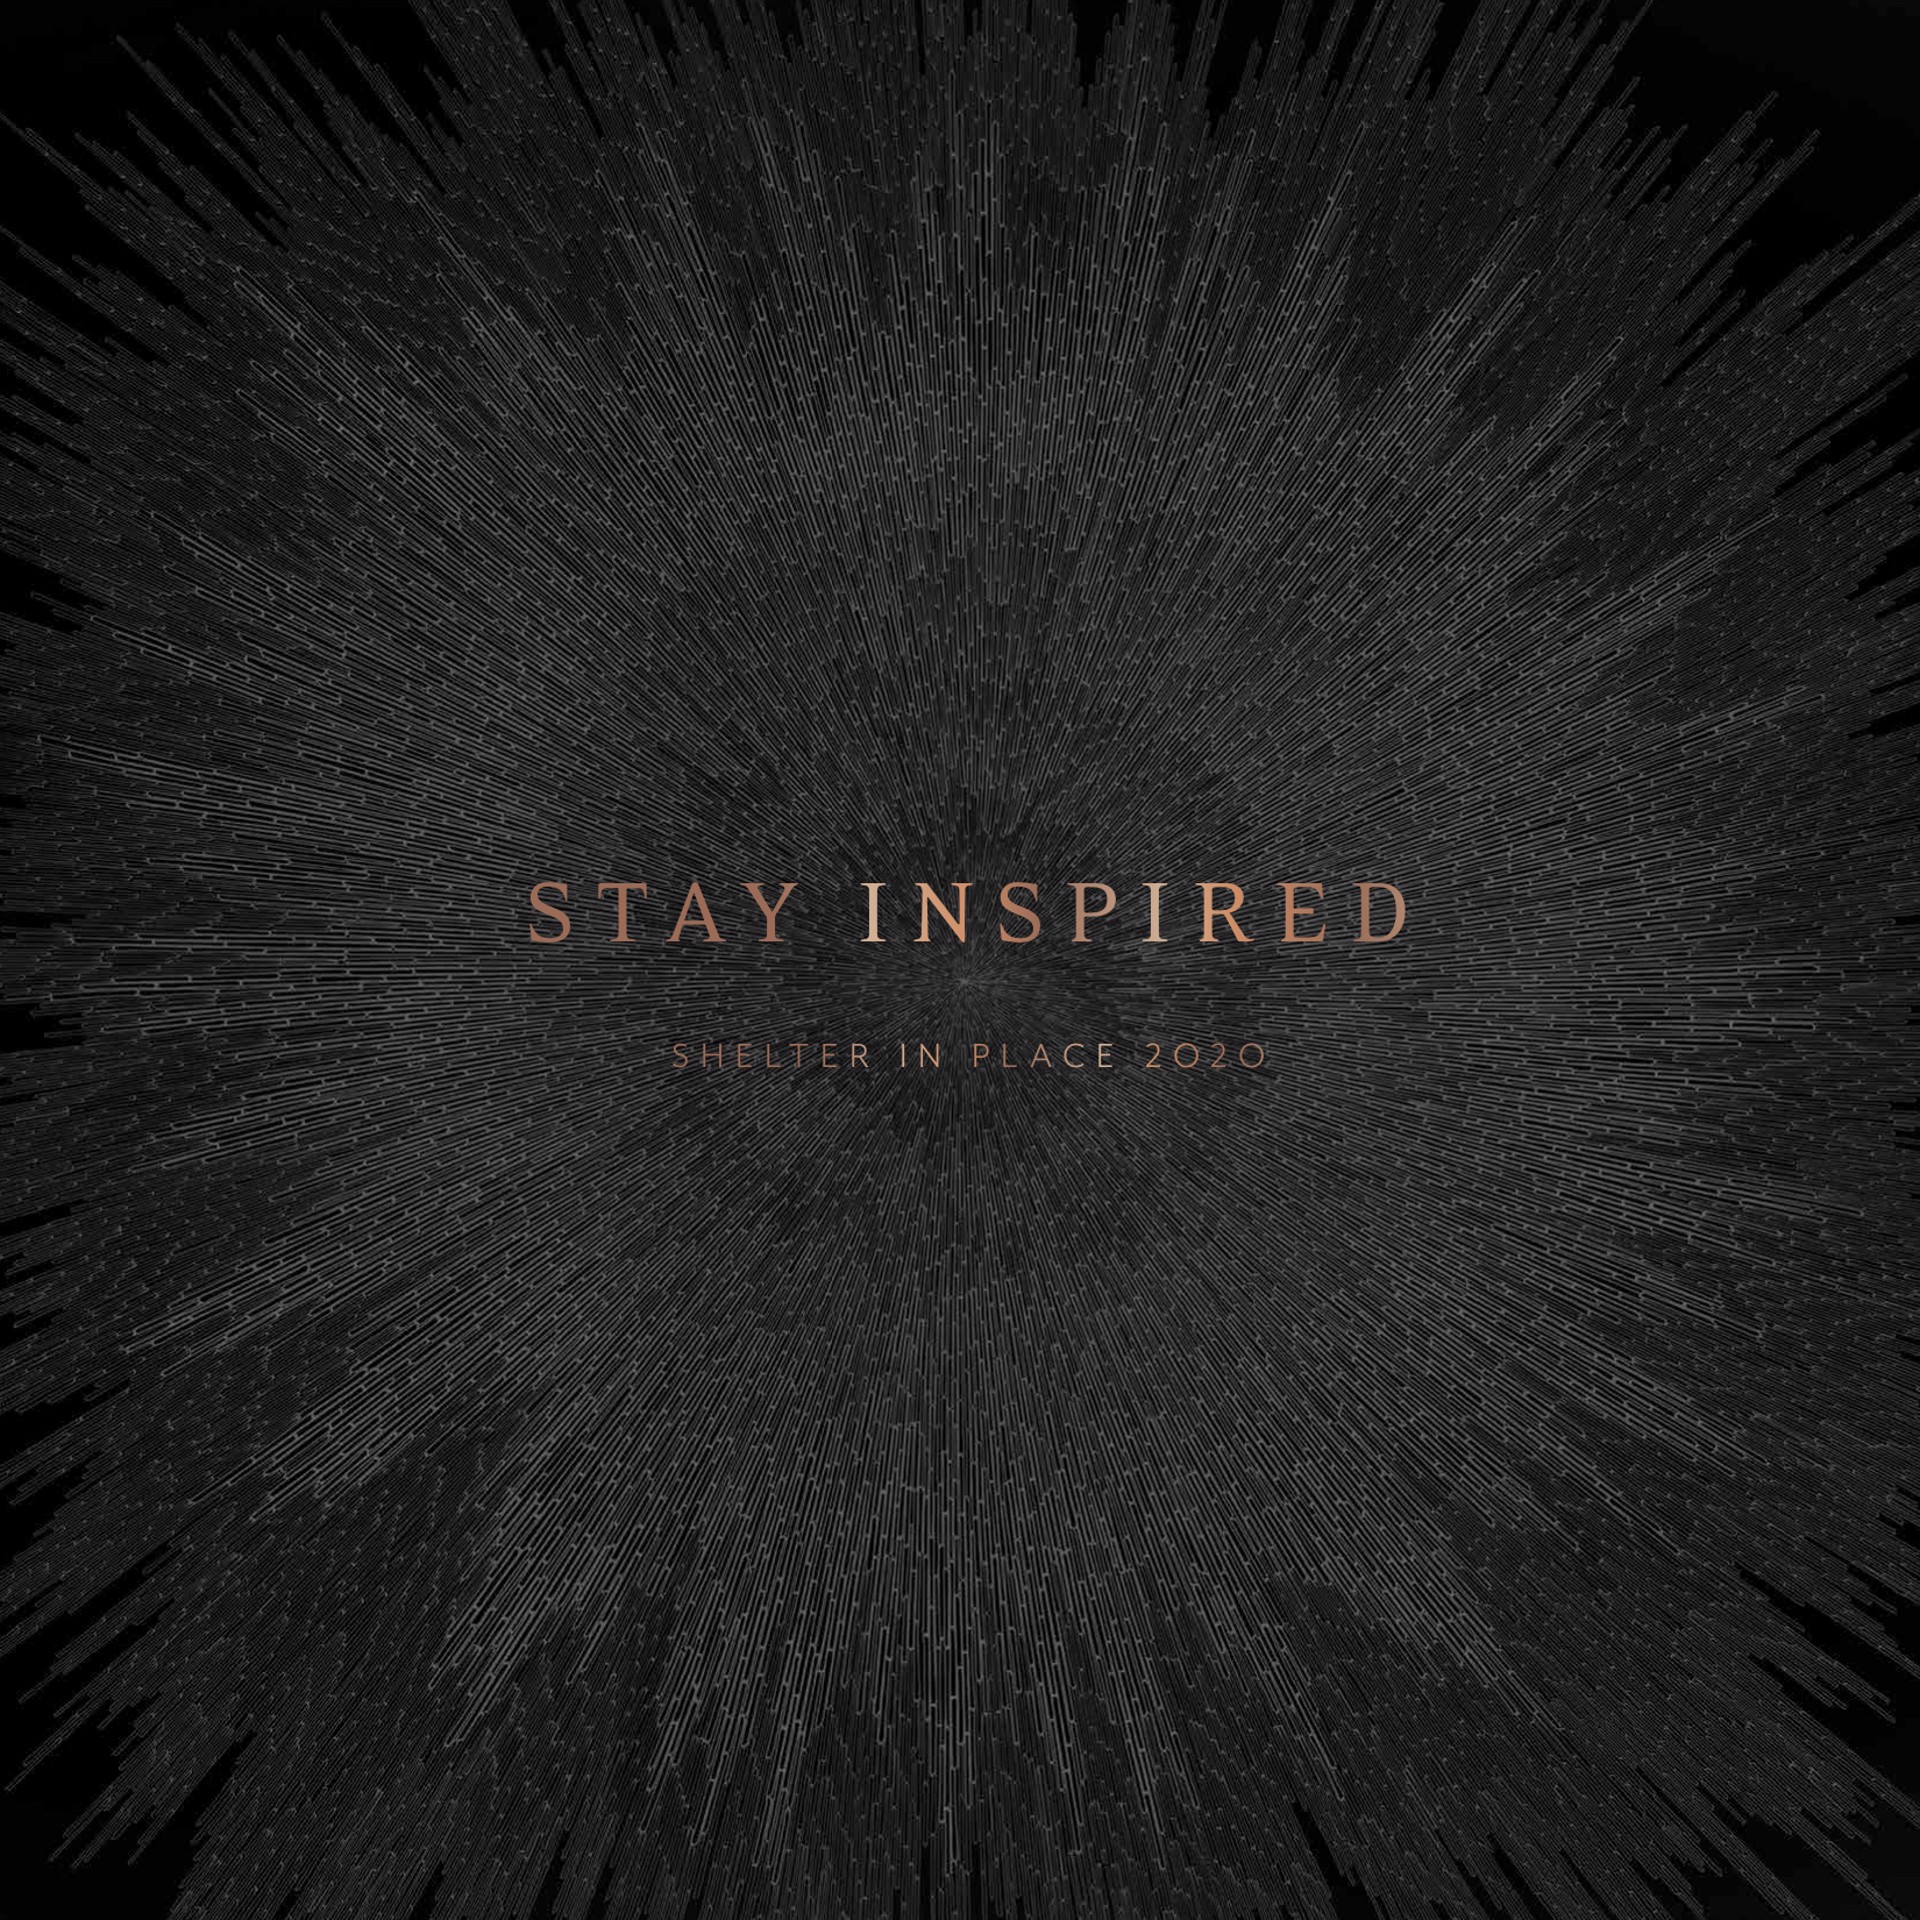 Stay Inspired: Shelter in Place 2020 (limited edition)